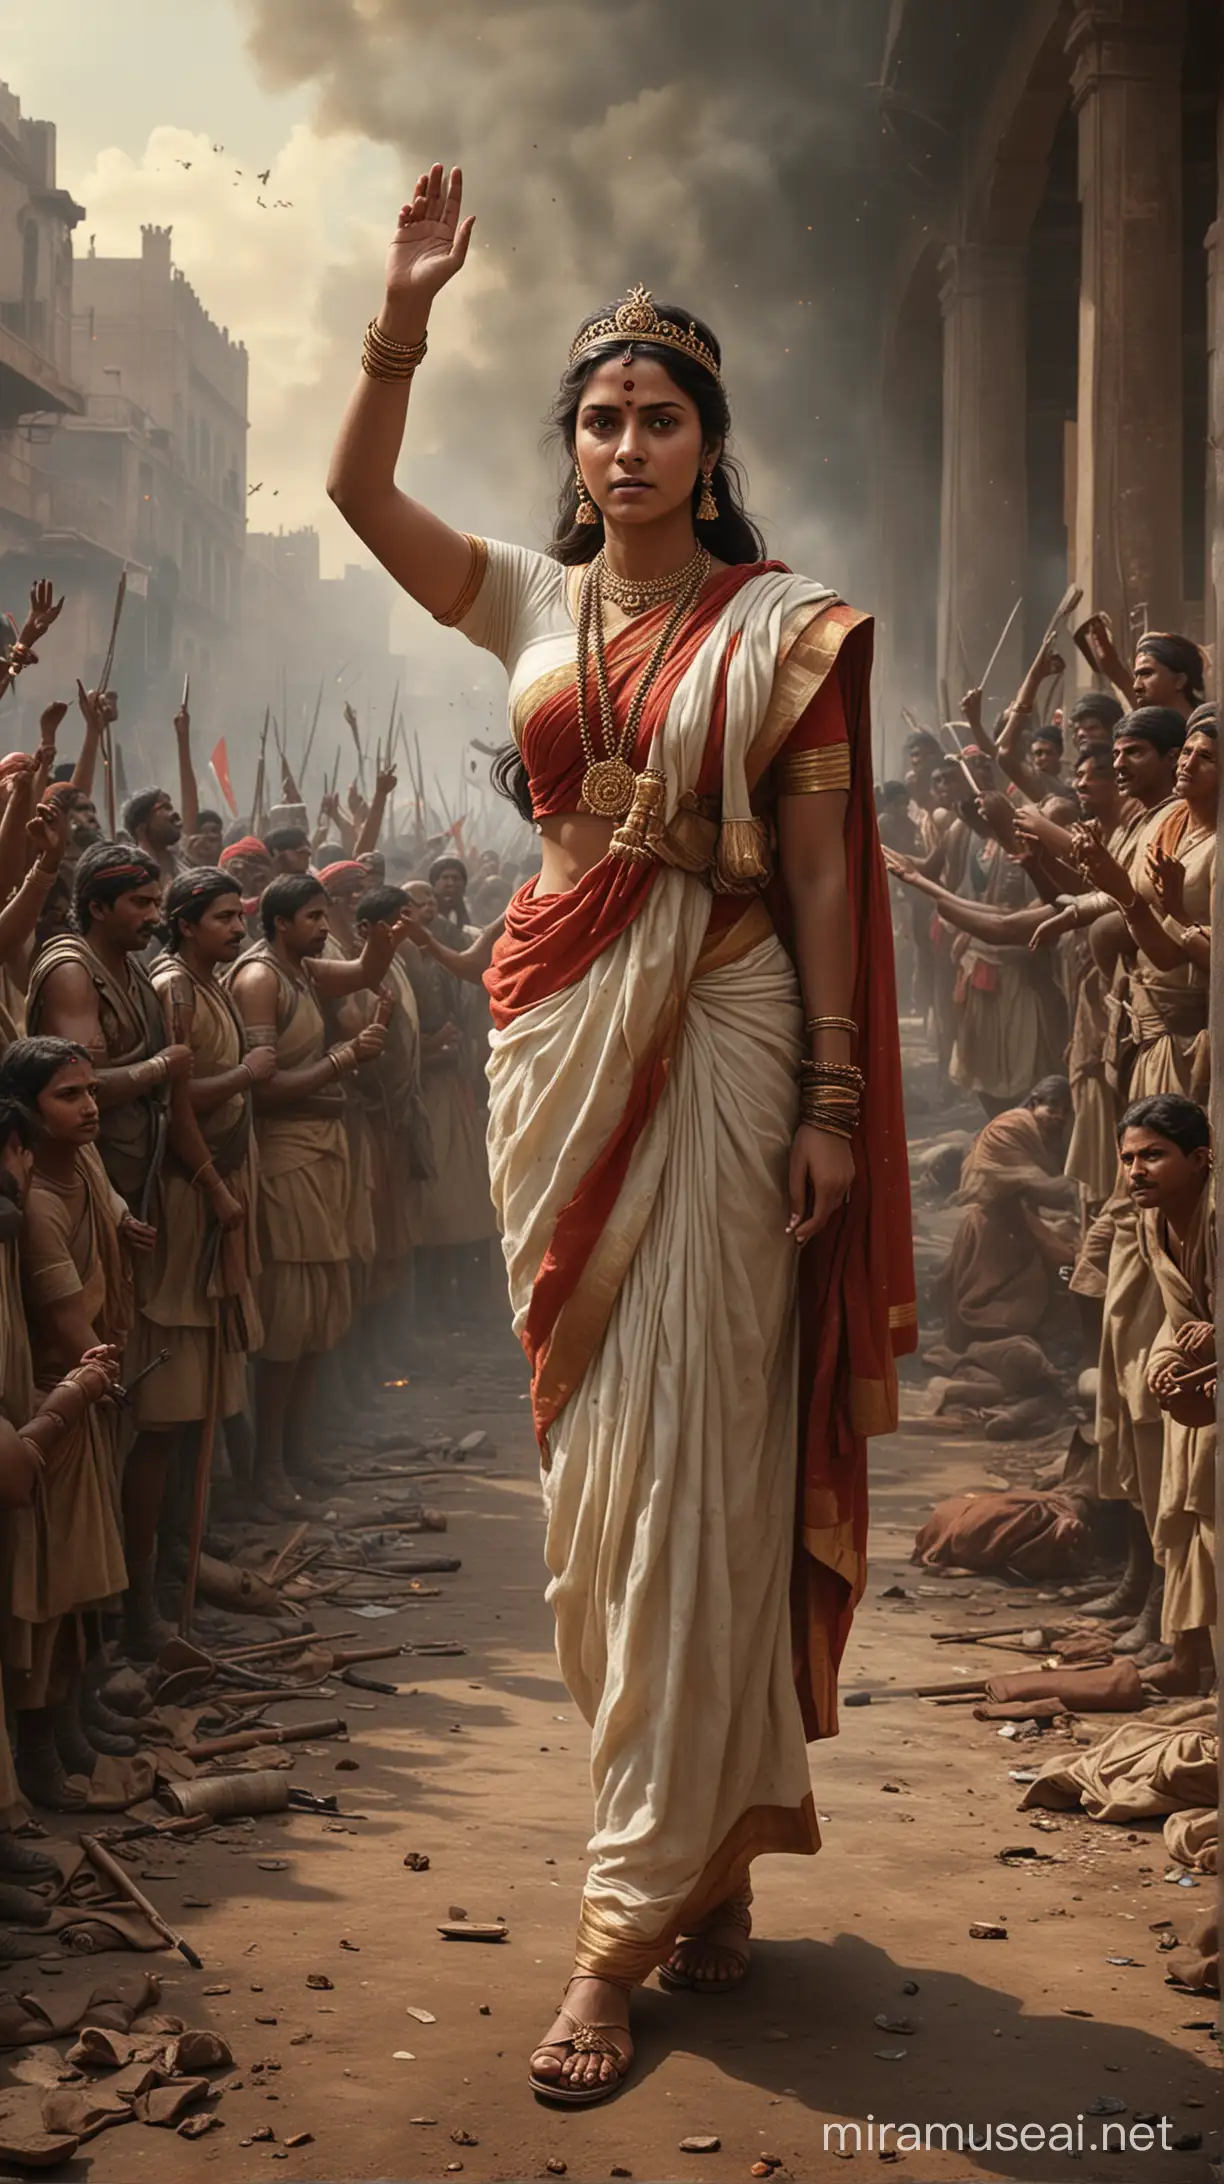 An atmospheric image of British Commander Hugh Rose acknowledging Lakshmi Bai's bravery, capturing the moment of recognition for her singular courage amidst the chaos of war. hyper realistic